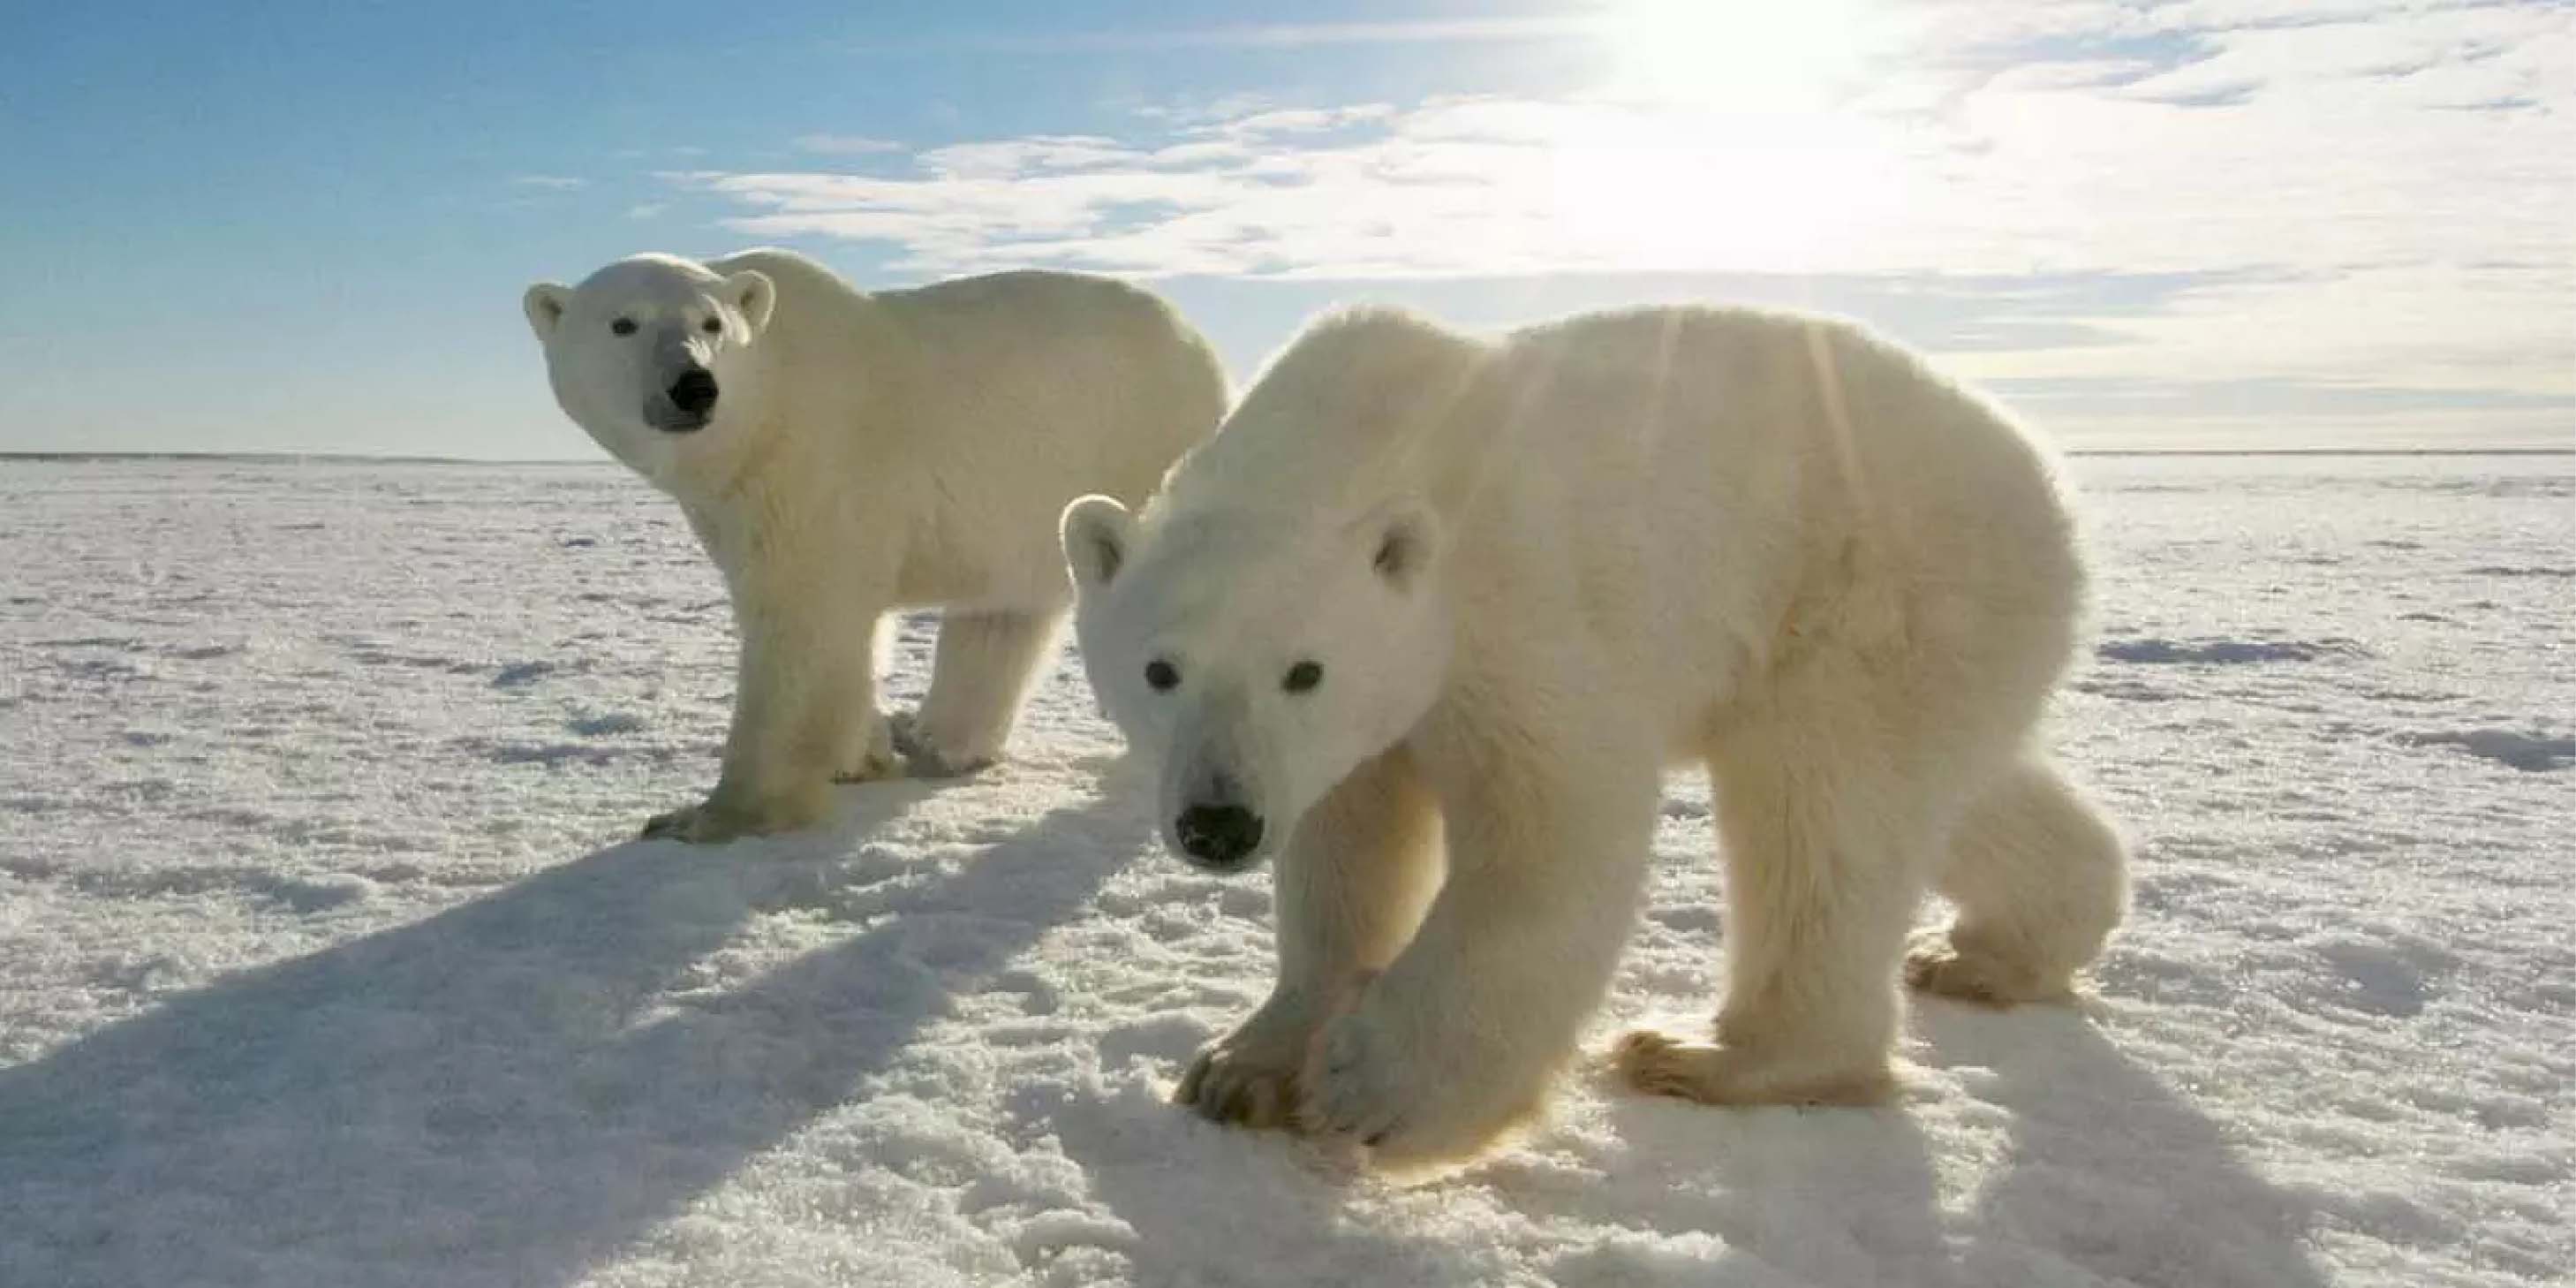 Two polar bears walking in the snow with the sun shining in the background.